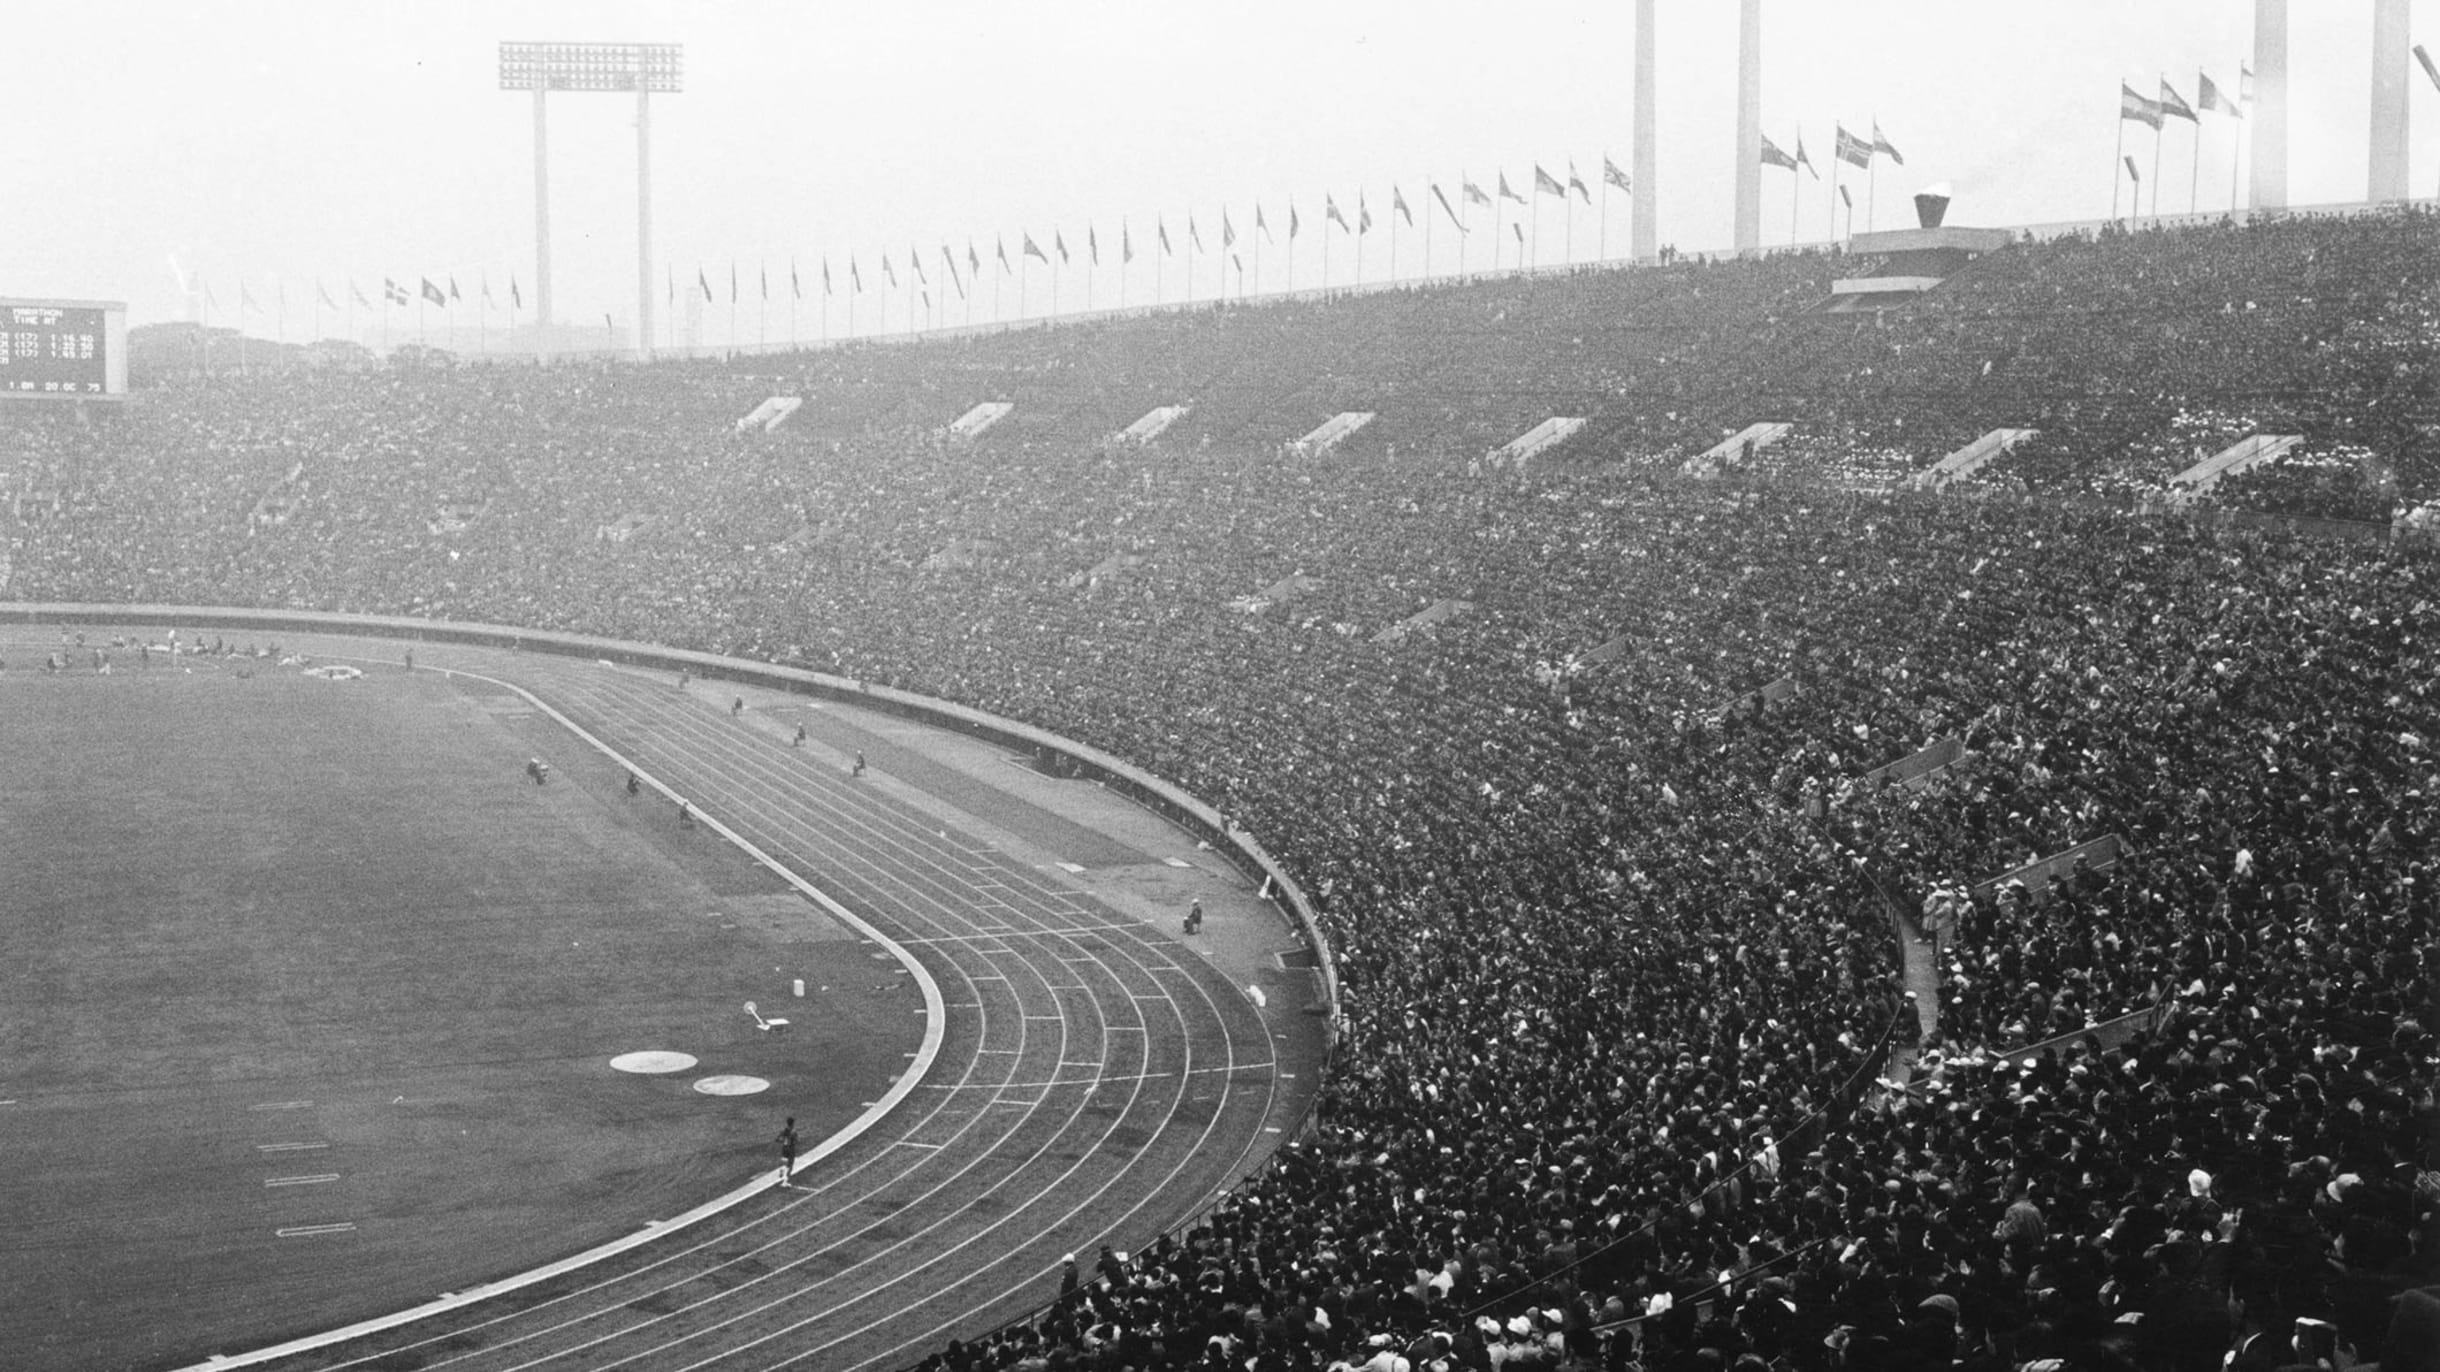 Tokyo 1964 - Japan showcases rebirth and resilience - Olympic News